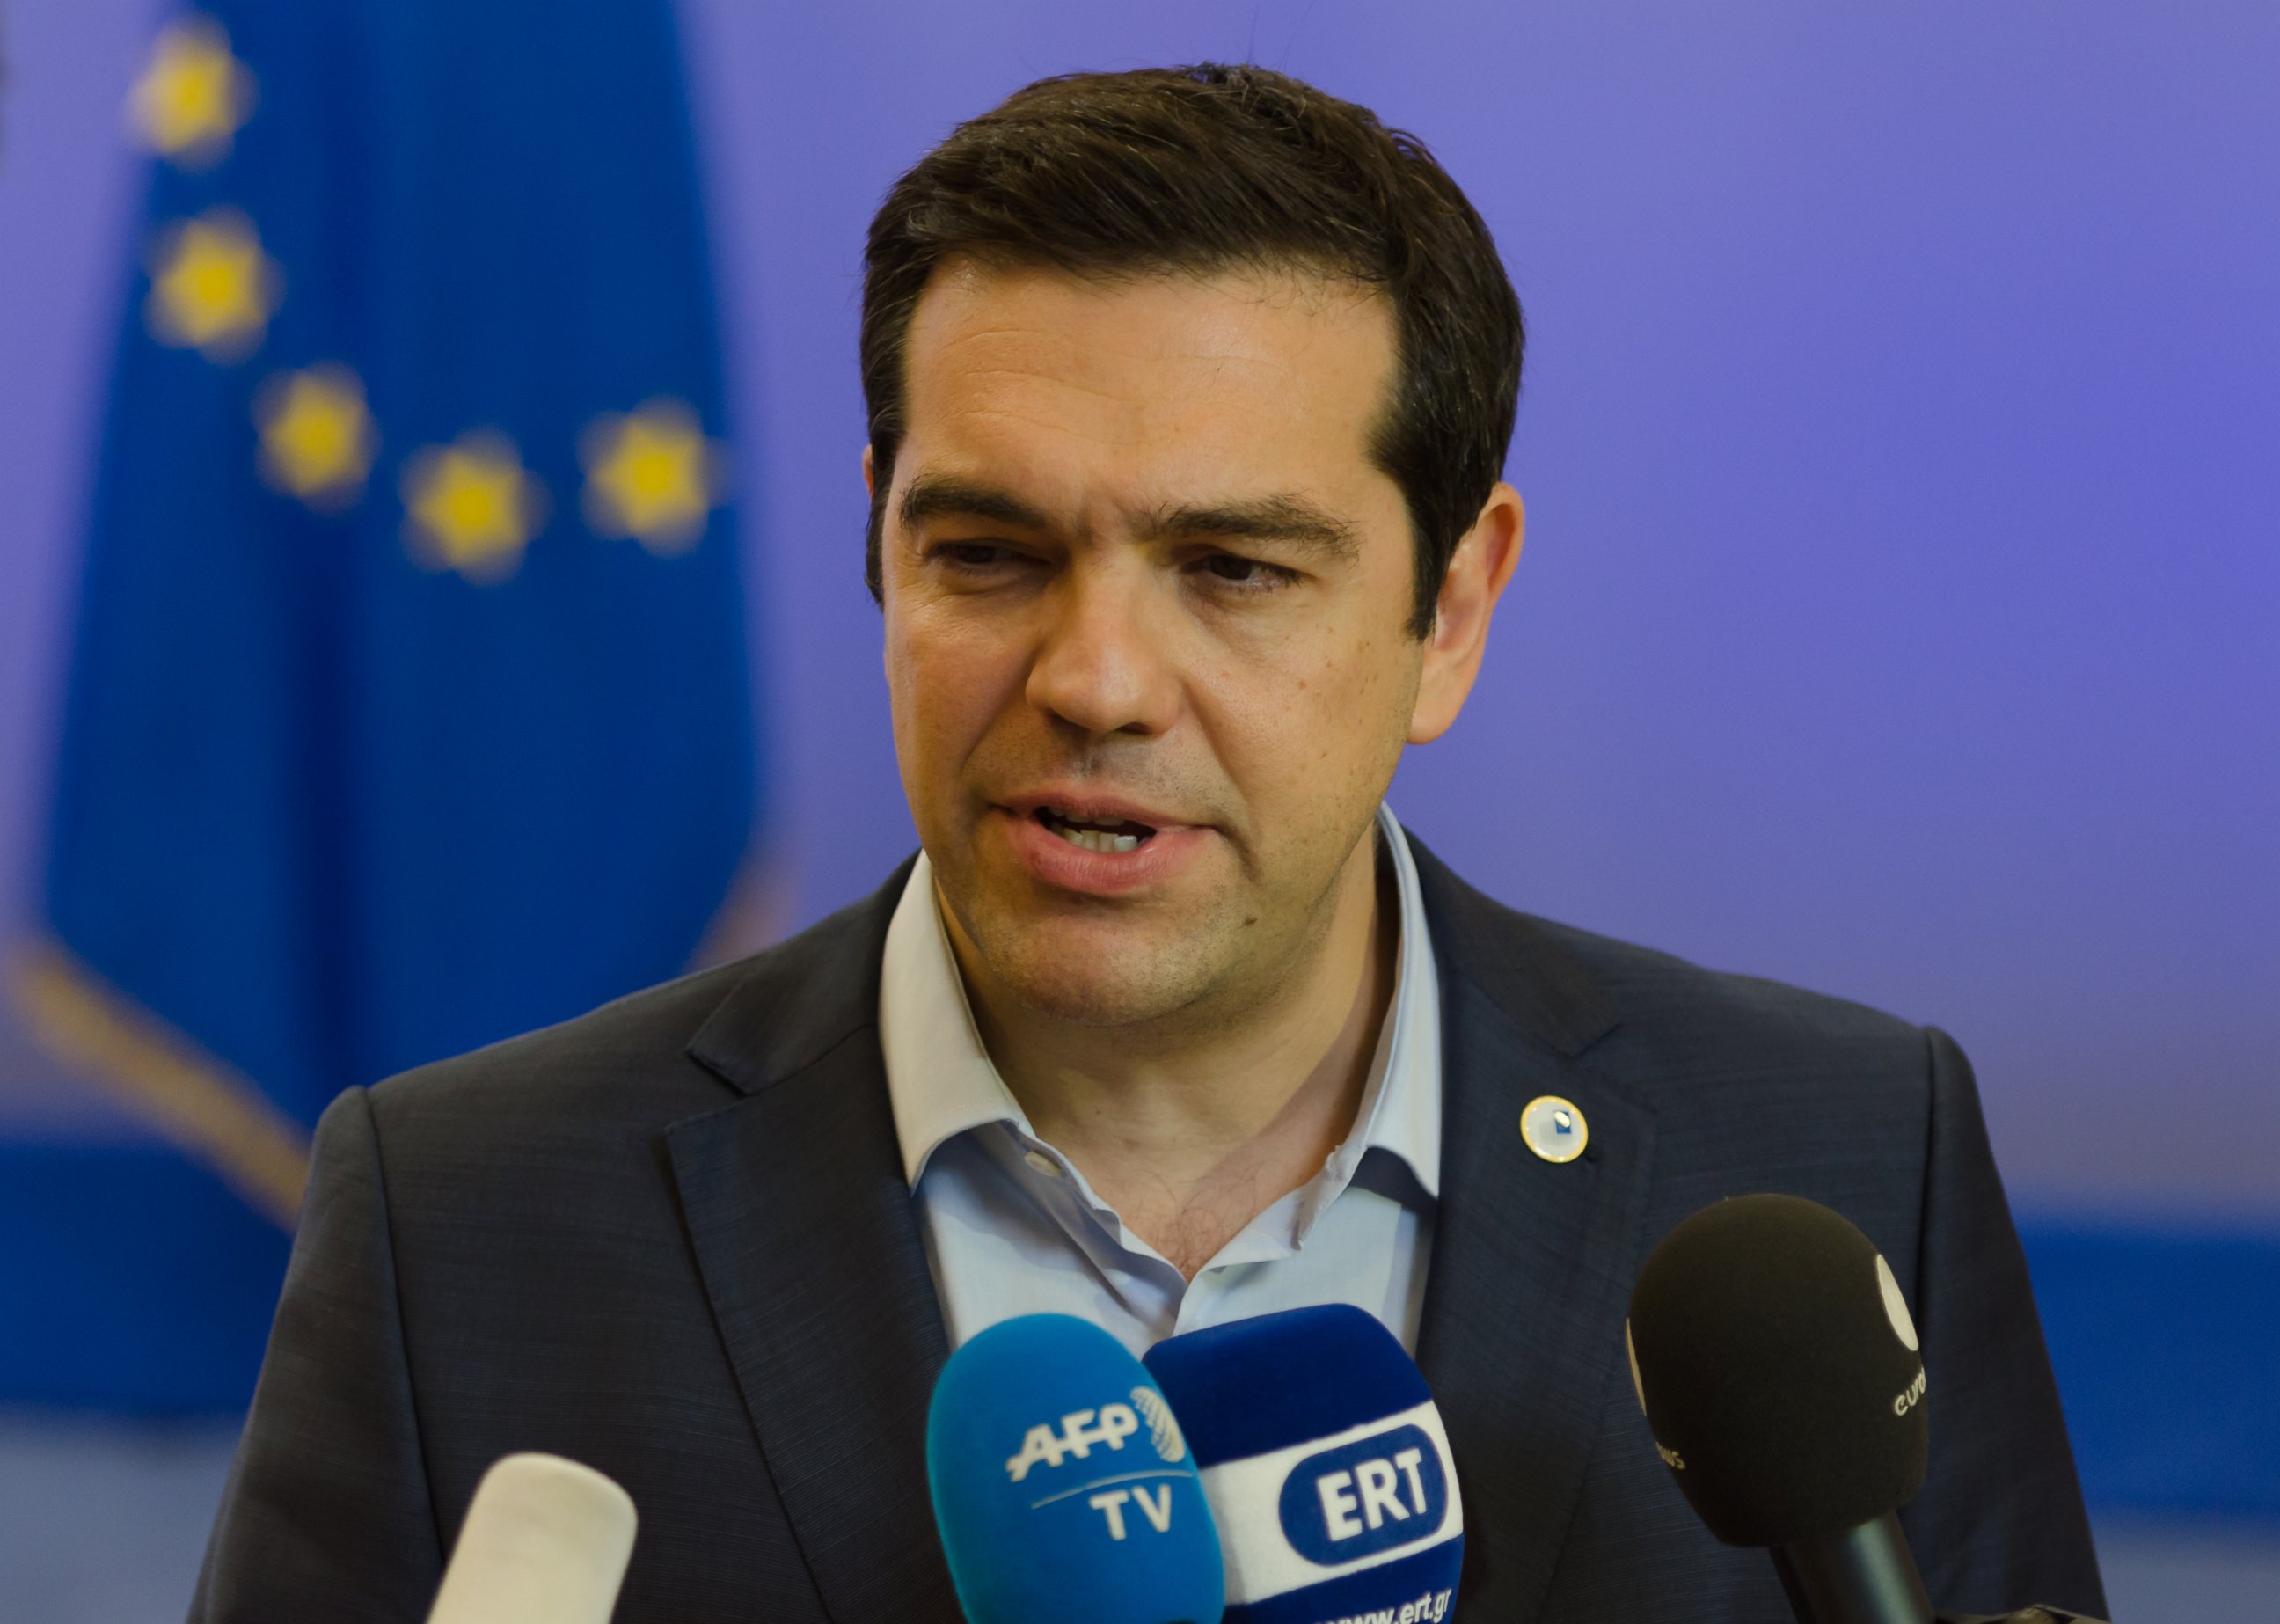 PHOTO: Greek Prime Minister Alexis Tsipras speaks with the media after a meeting of eurozone heads of state at the EU Council building, July 13, 2015, in Brussels.